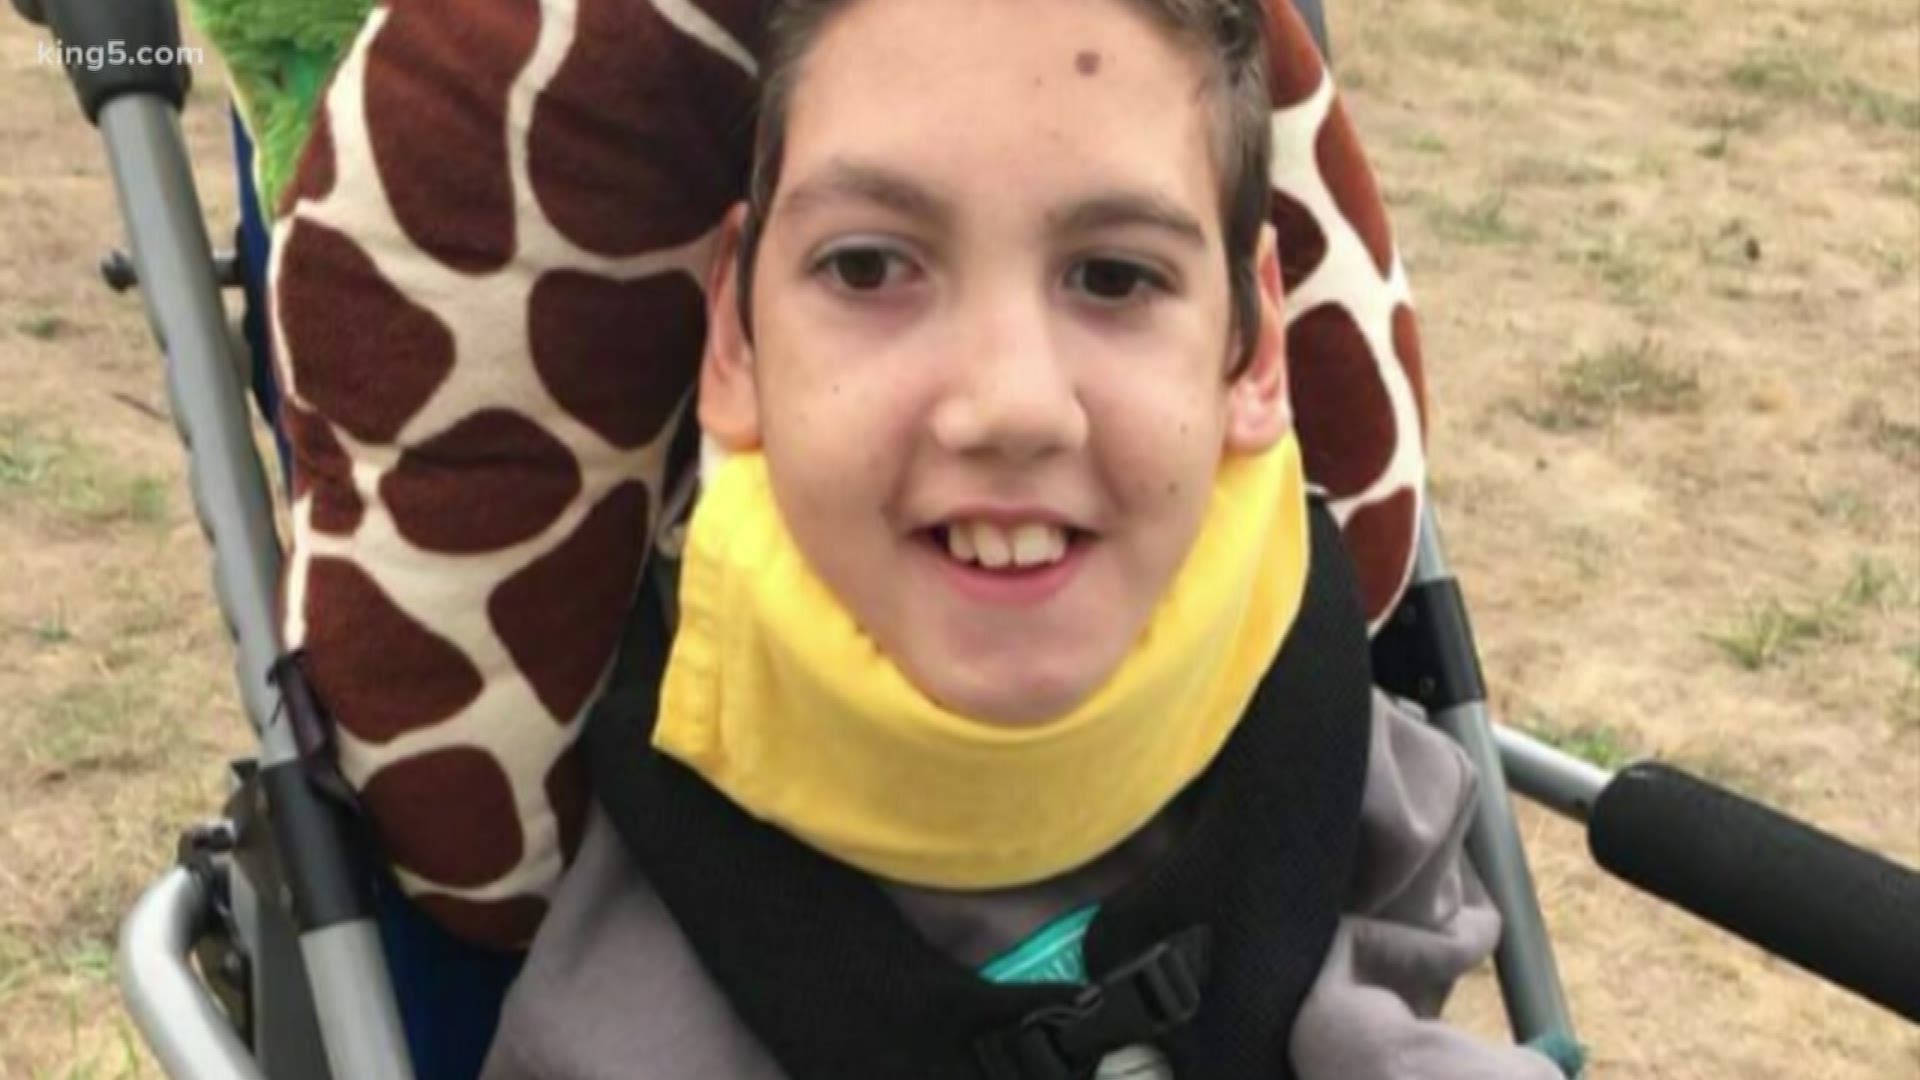 Community rallies behind sick Kingston boy who was stranded in Mexico. KING 5's Eric Wilkinson reports.